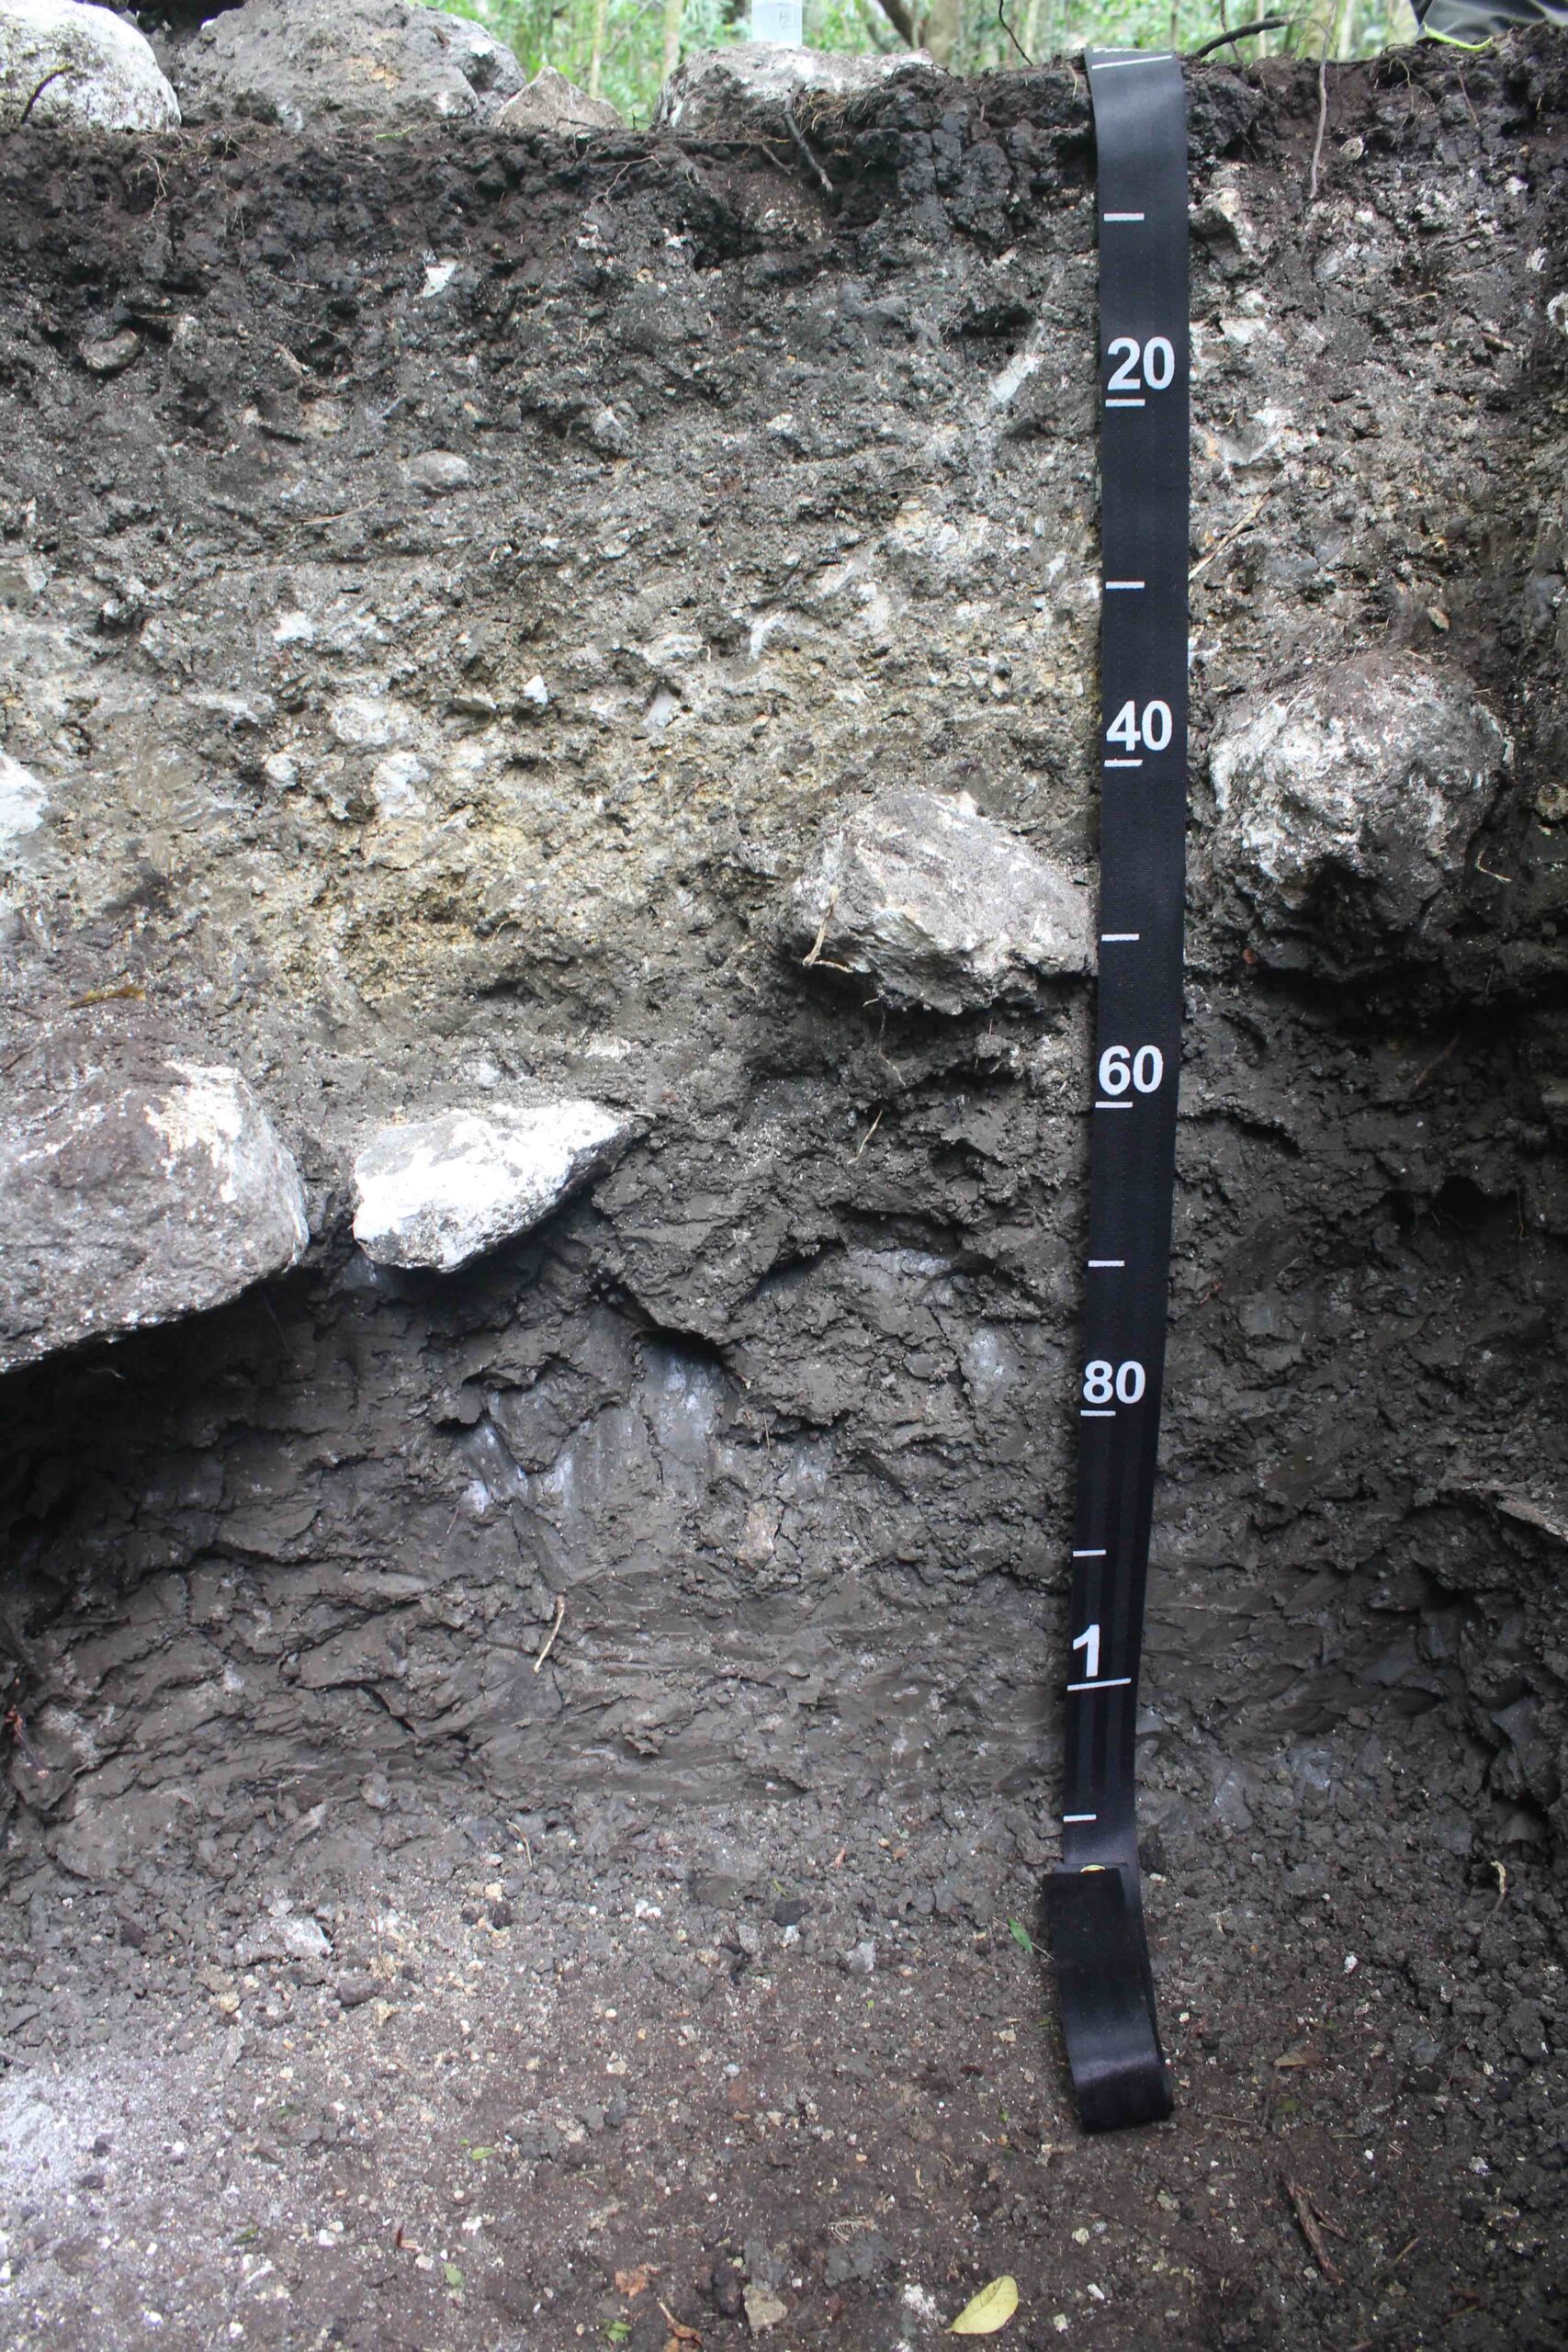 A cross-section view of soil layers at an El-Peru Waka reservoir.